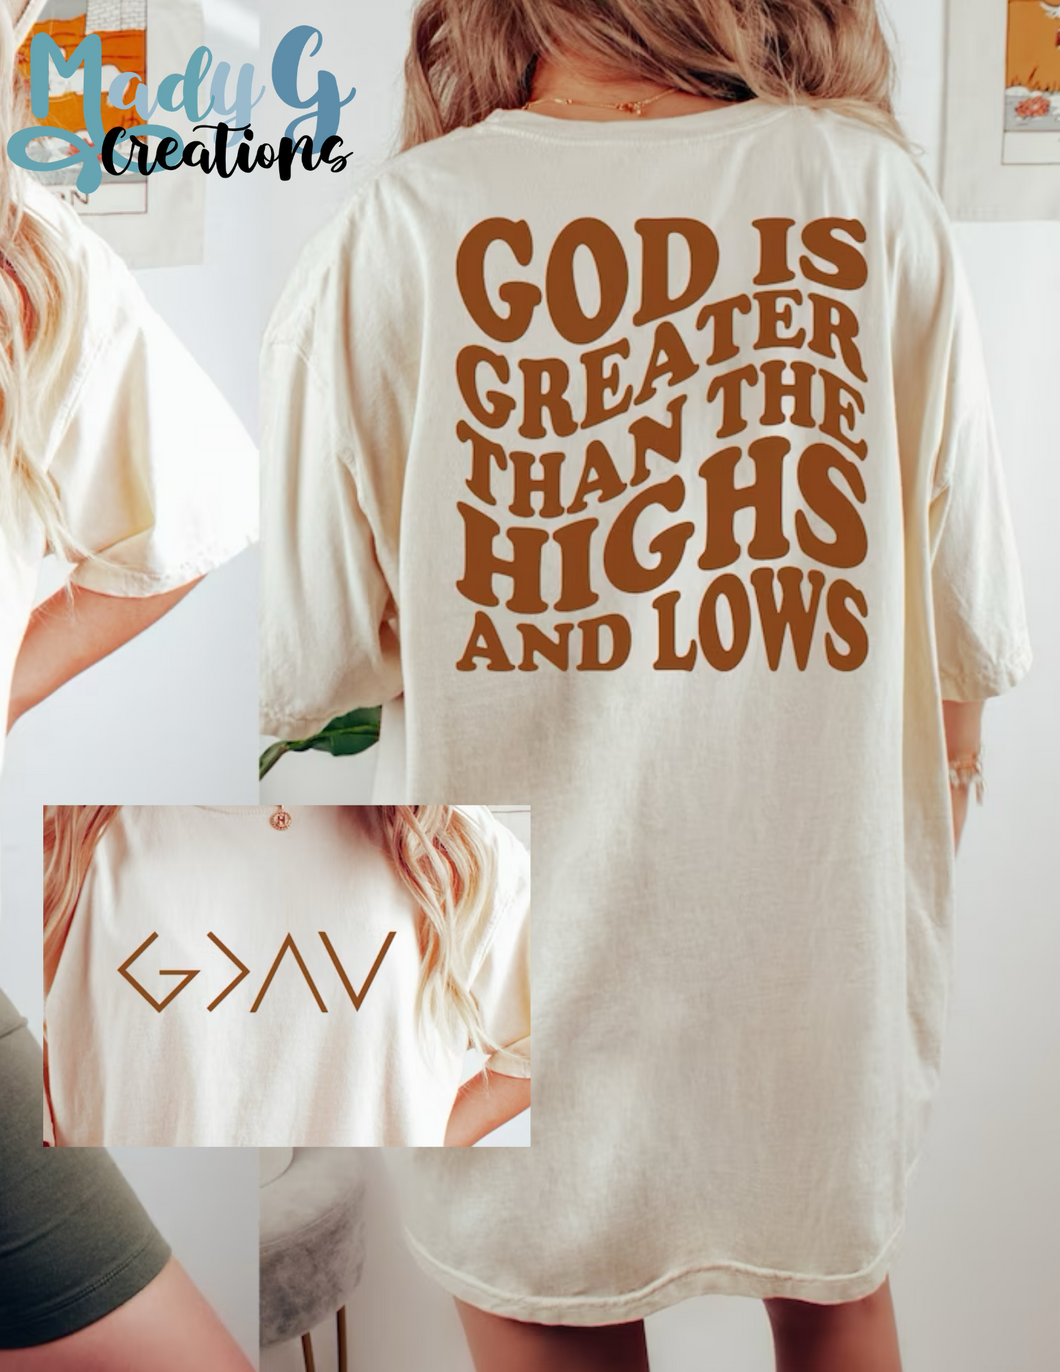 God is greater than the highs and lows  Front  |  Clear Film Transfer